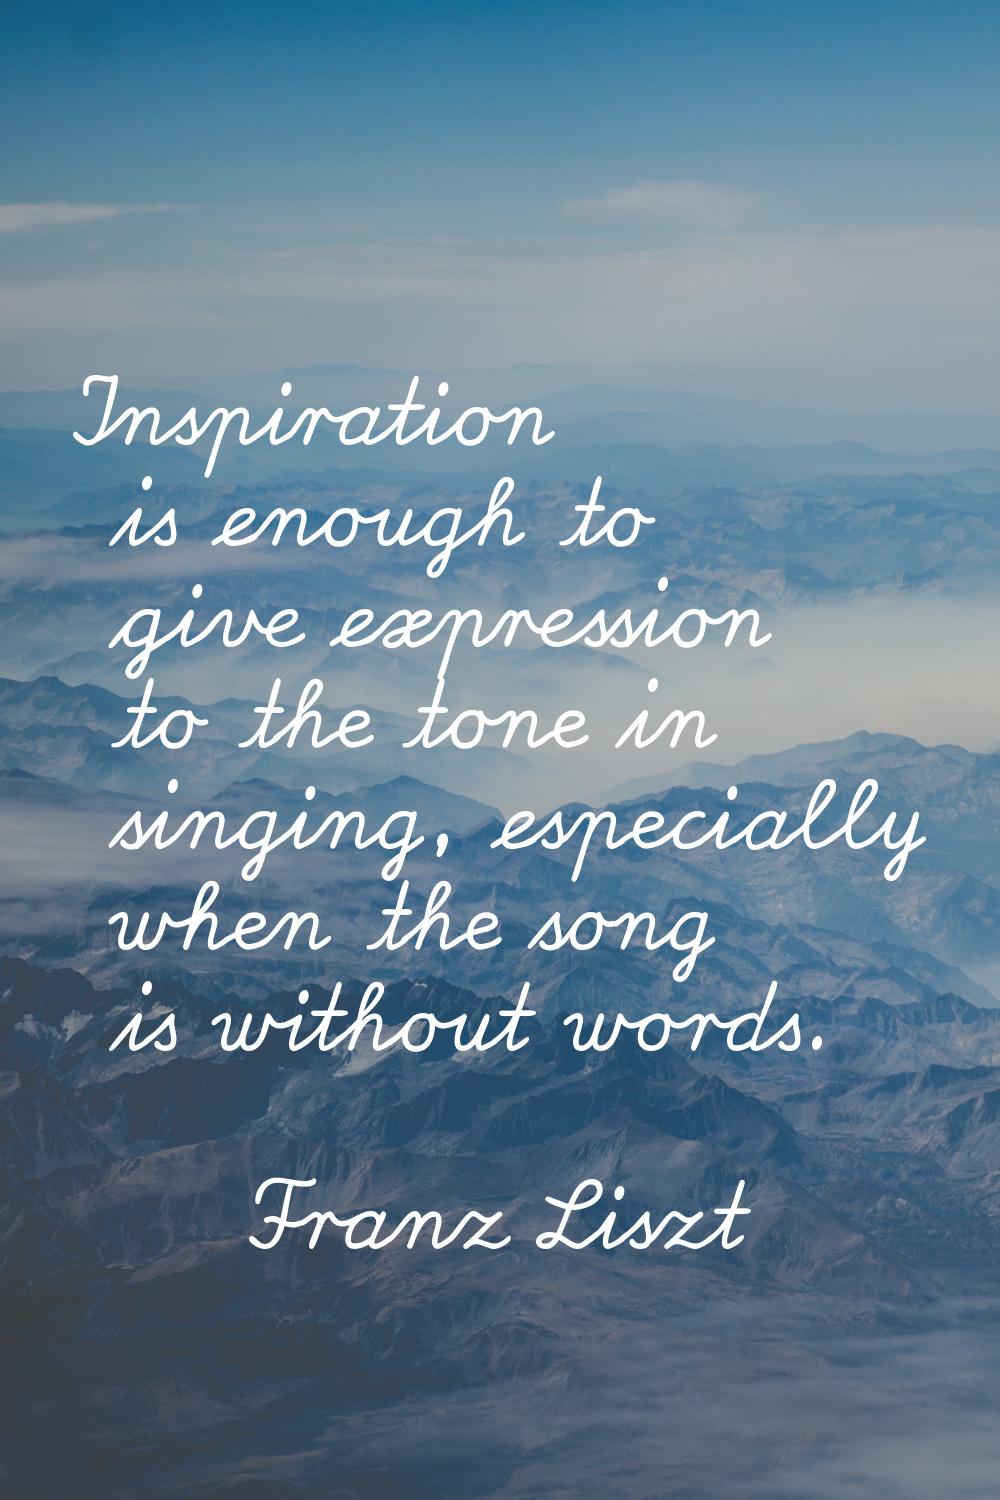 Inspiration is enough to give expression to the tone in singing, especially when the song is withou